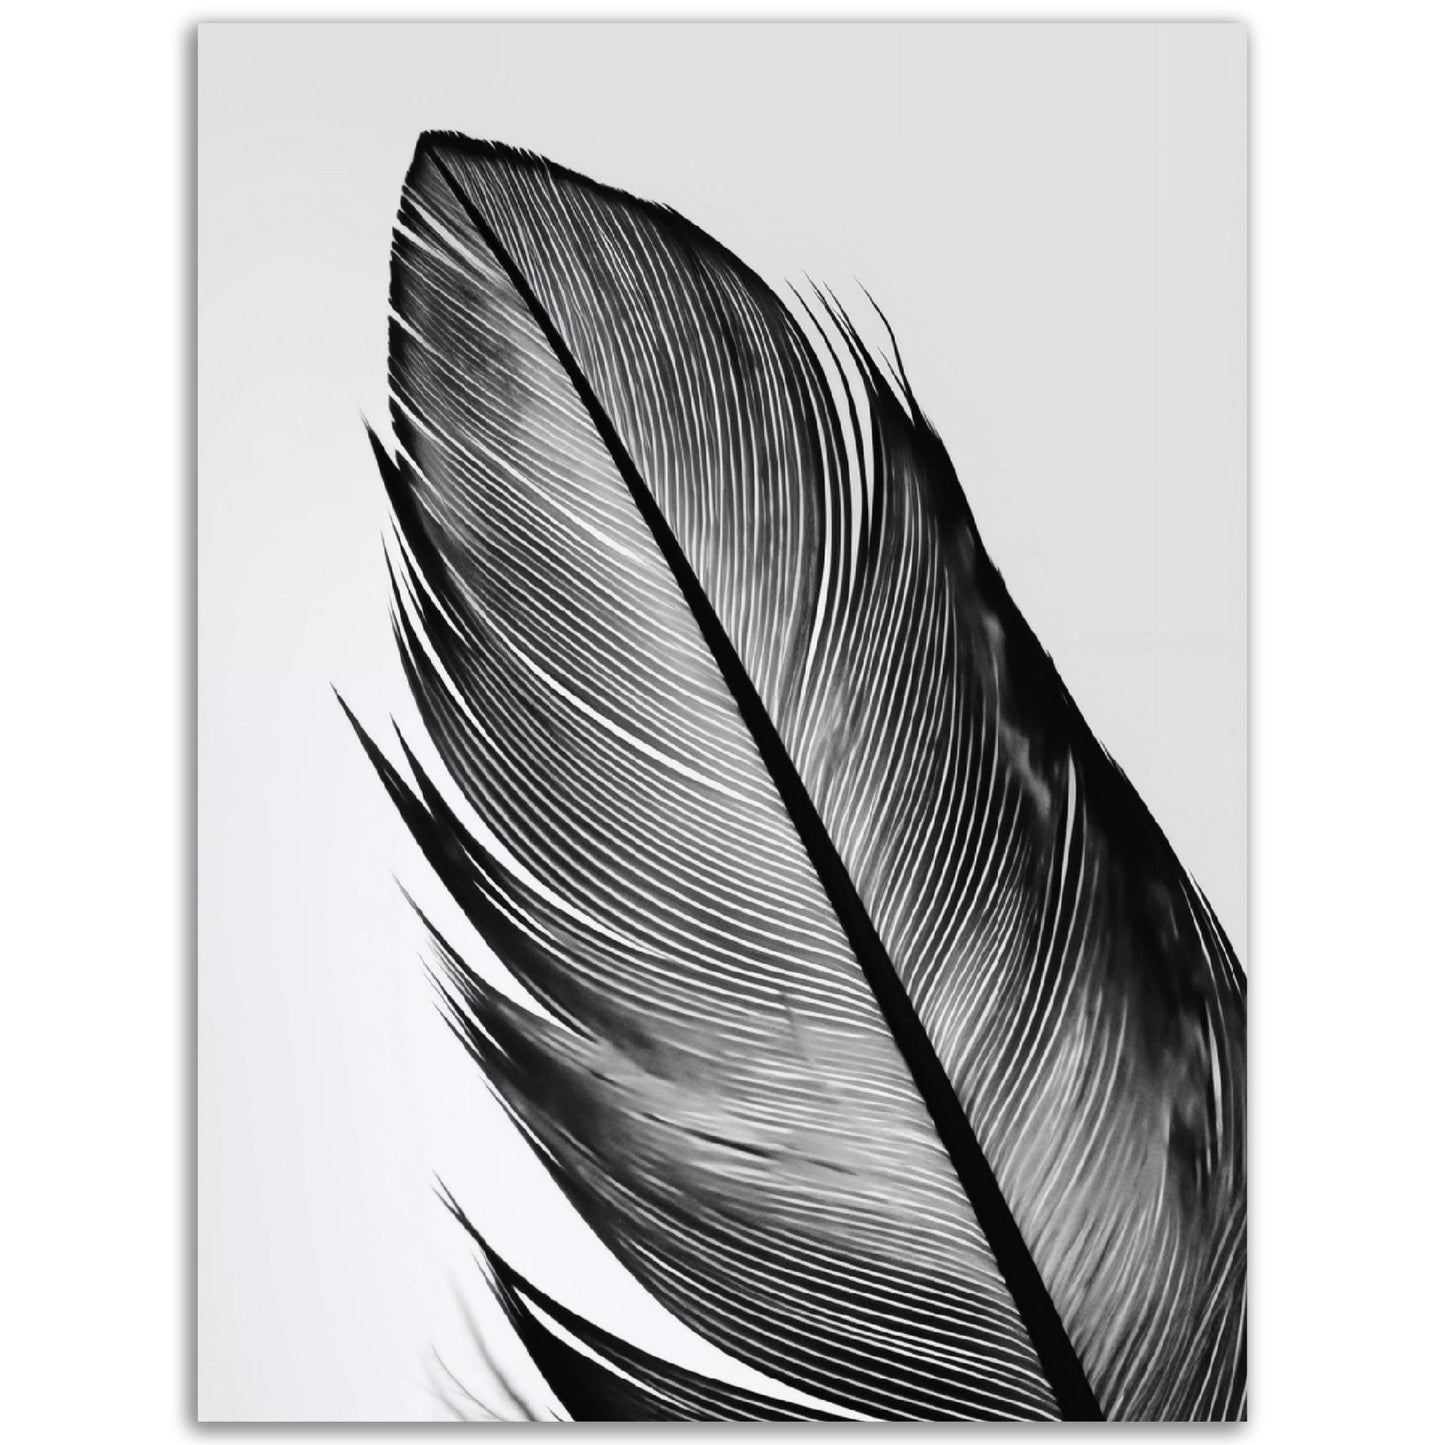 A black and white Feather Simplicity print on a white background, perfect for Poster Wall Art or as Posters for Room decoration.